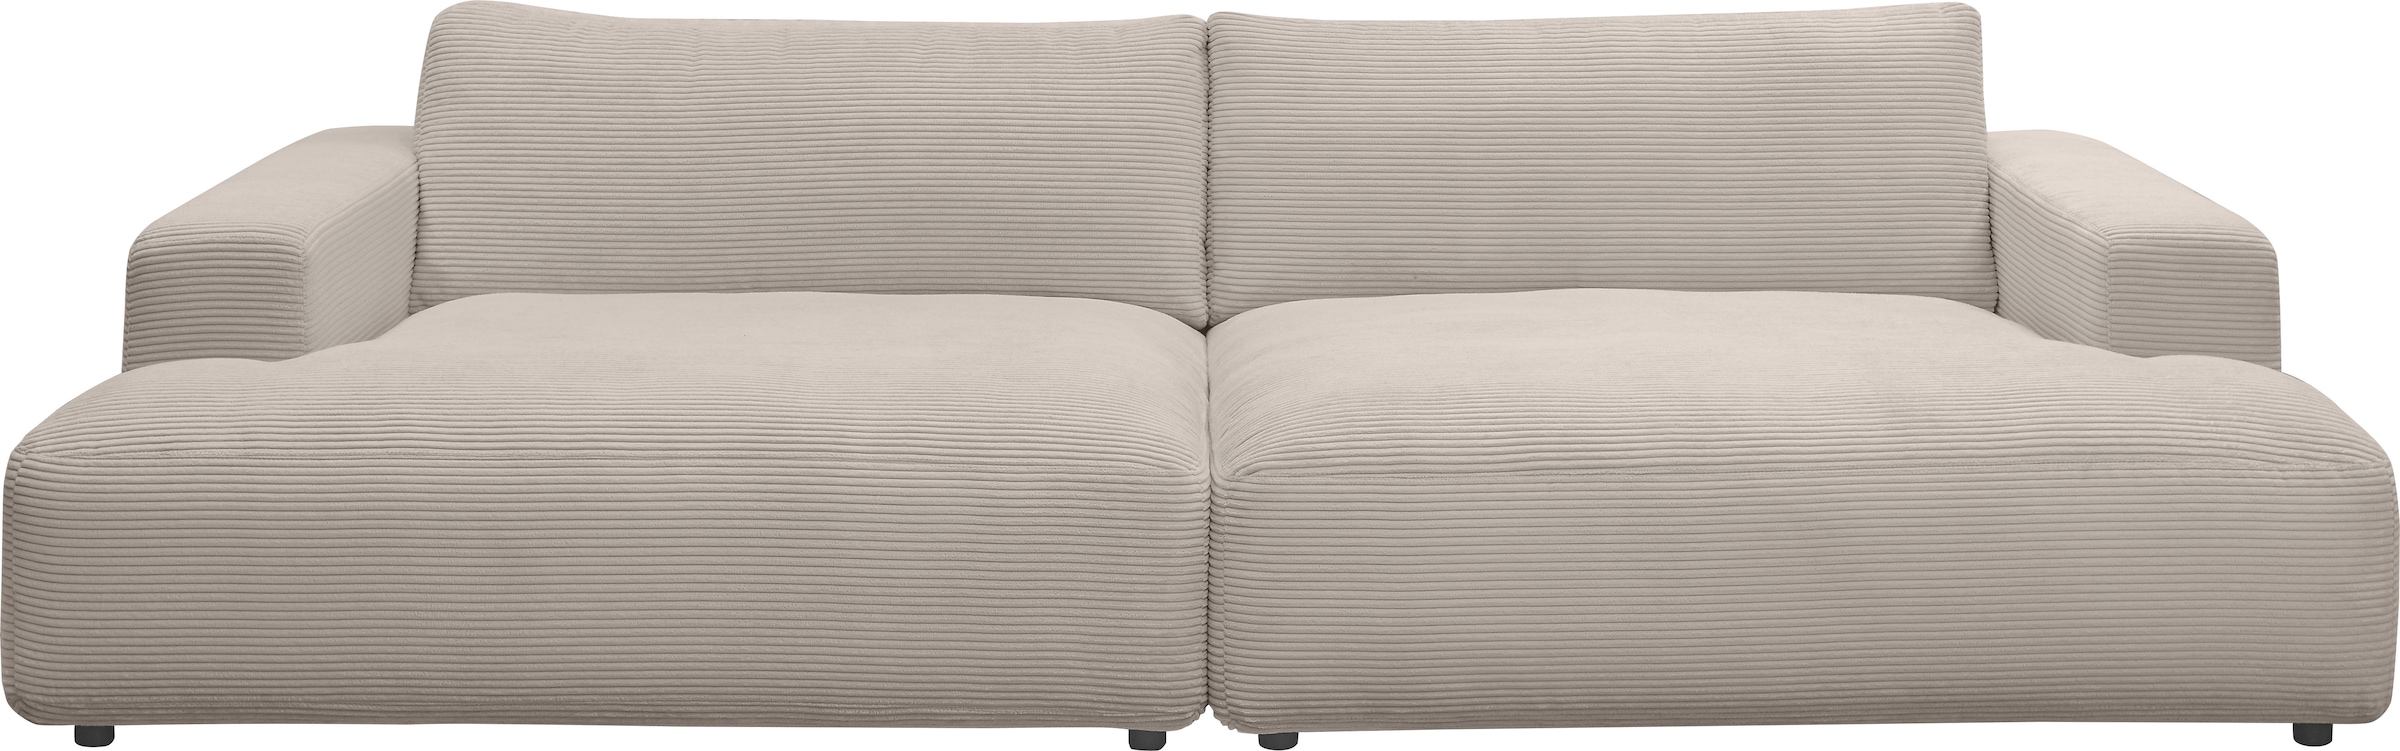 GALLERY M branded 292 Cord-Bezug, »Lucia«, Breite Loungesofa by cm kaufen bequem Musterring